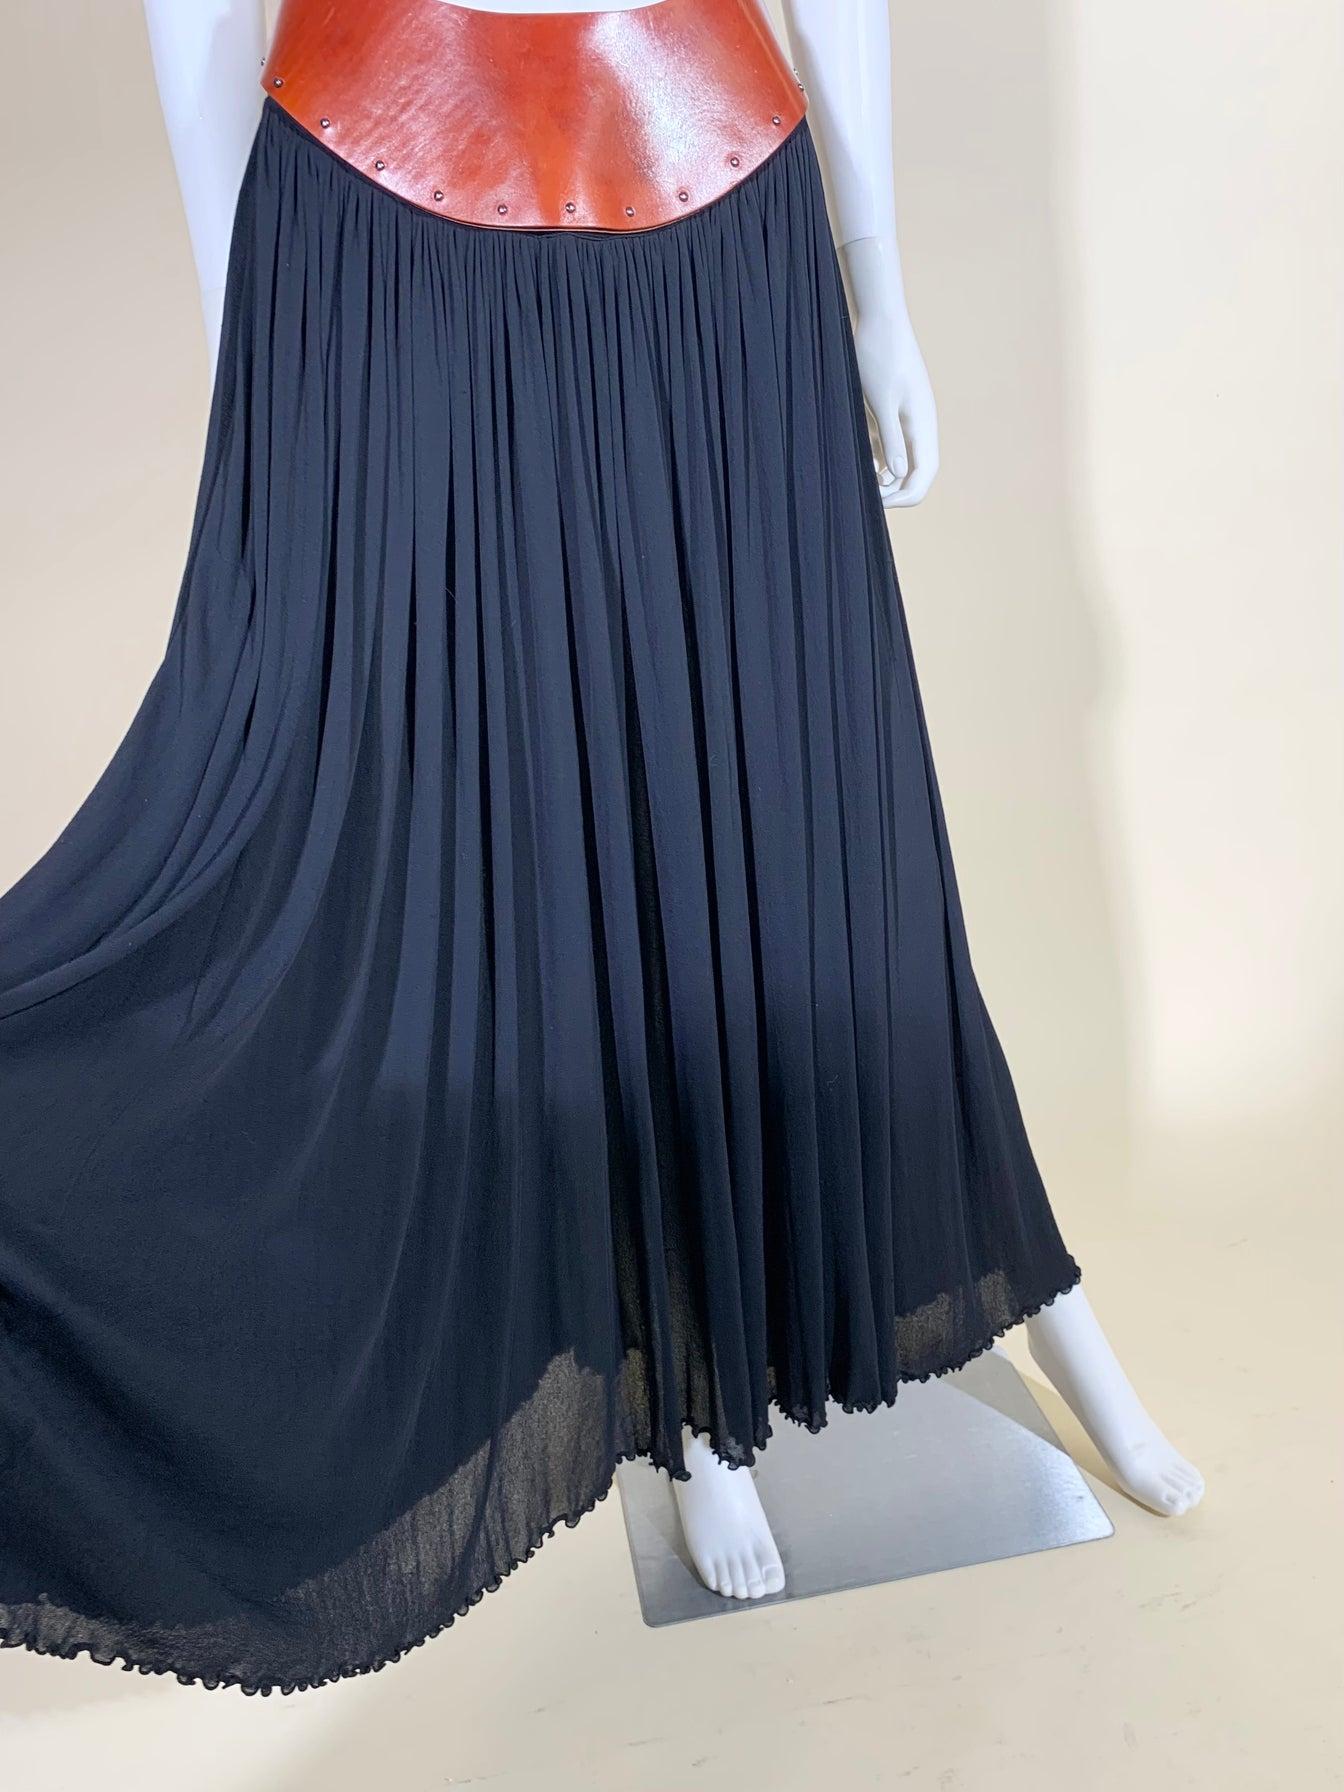 Jean-Paul Gaultier SS 2000 Femme Skirt In Excellent Condition For Sale In Avon, CT